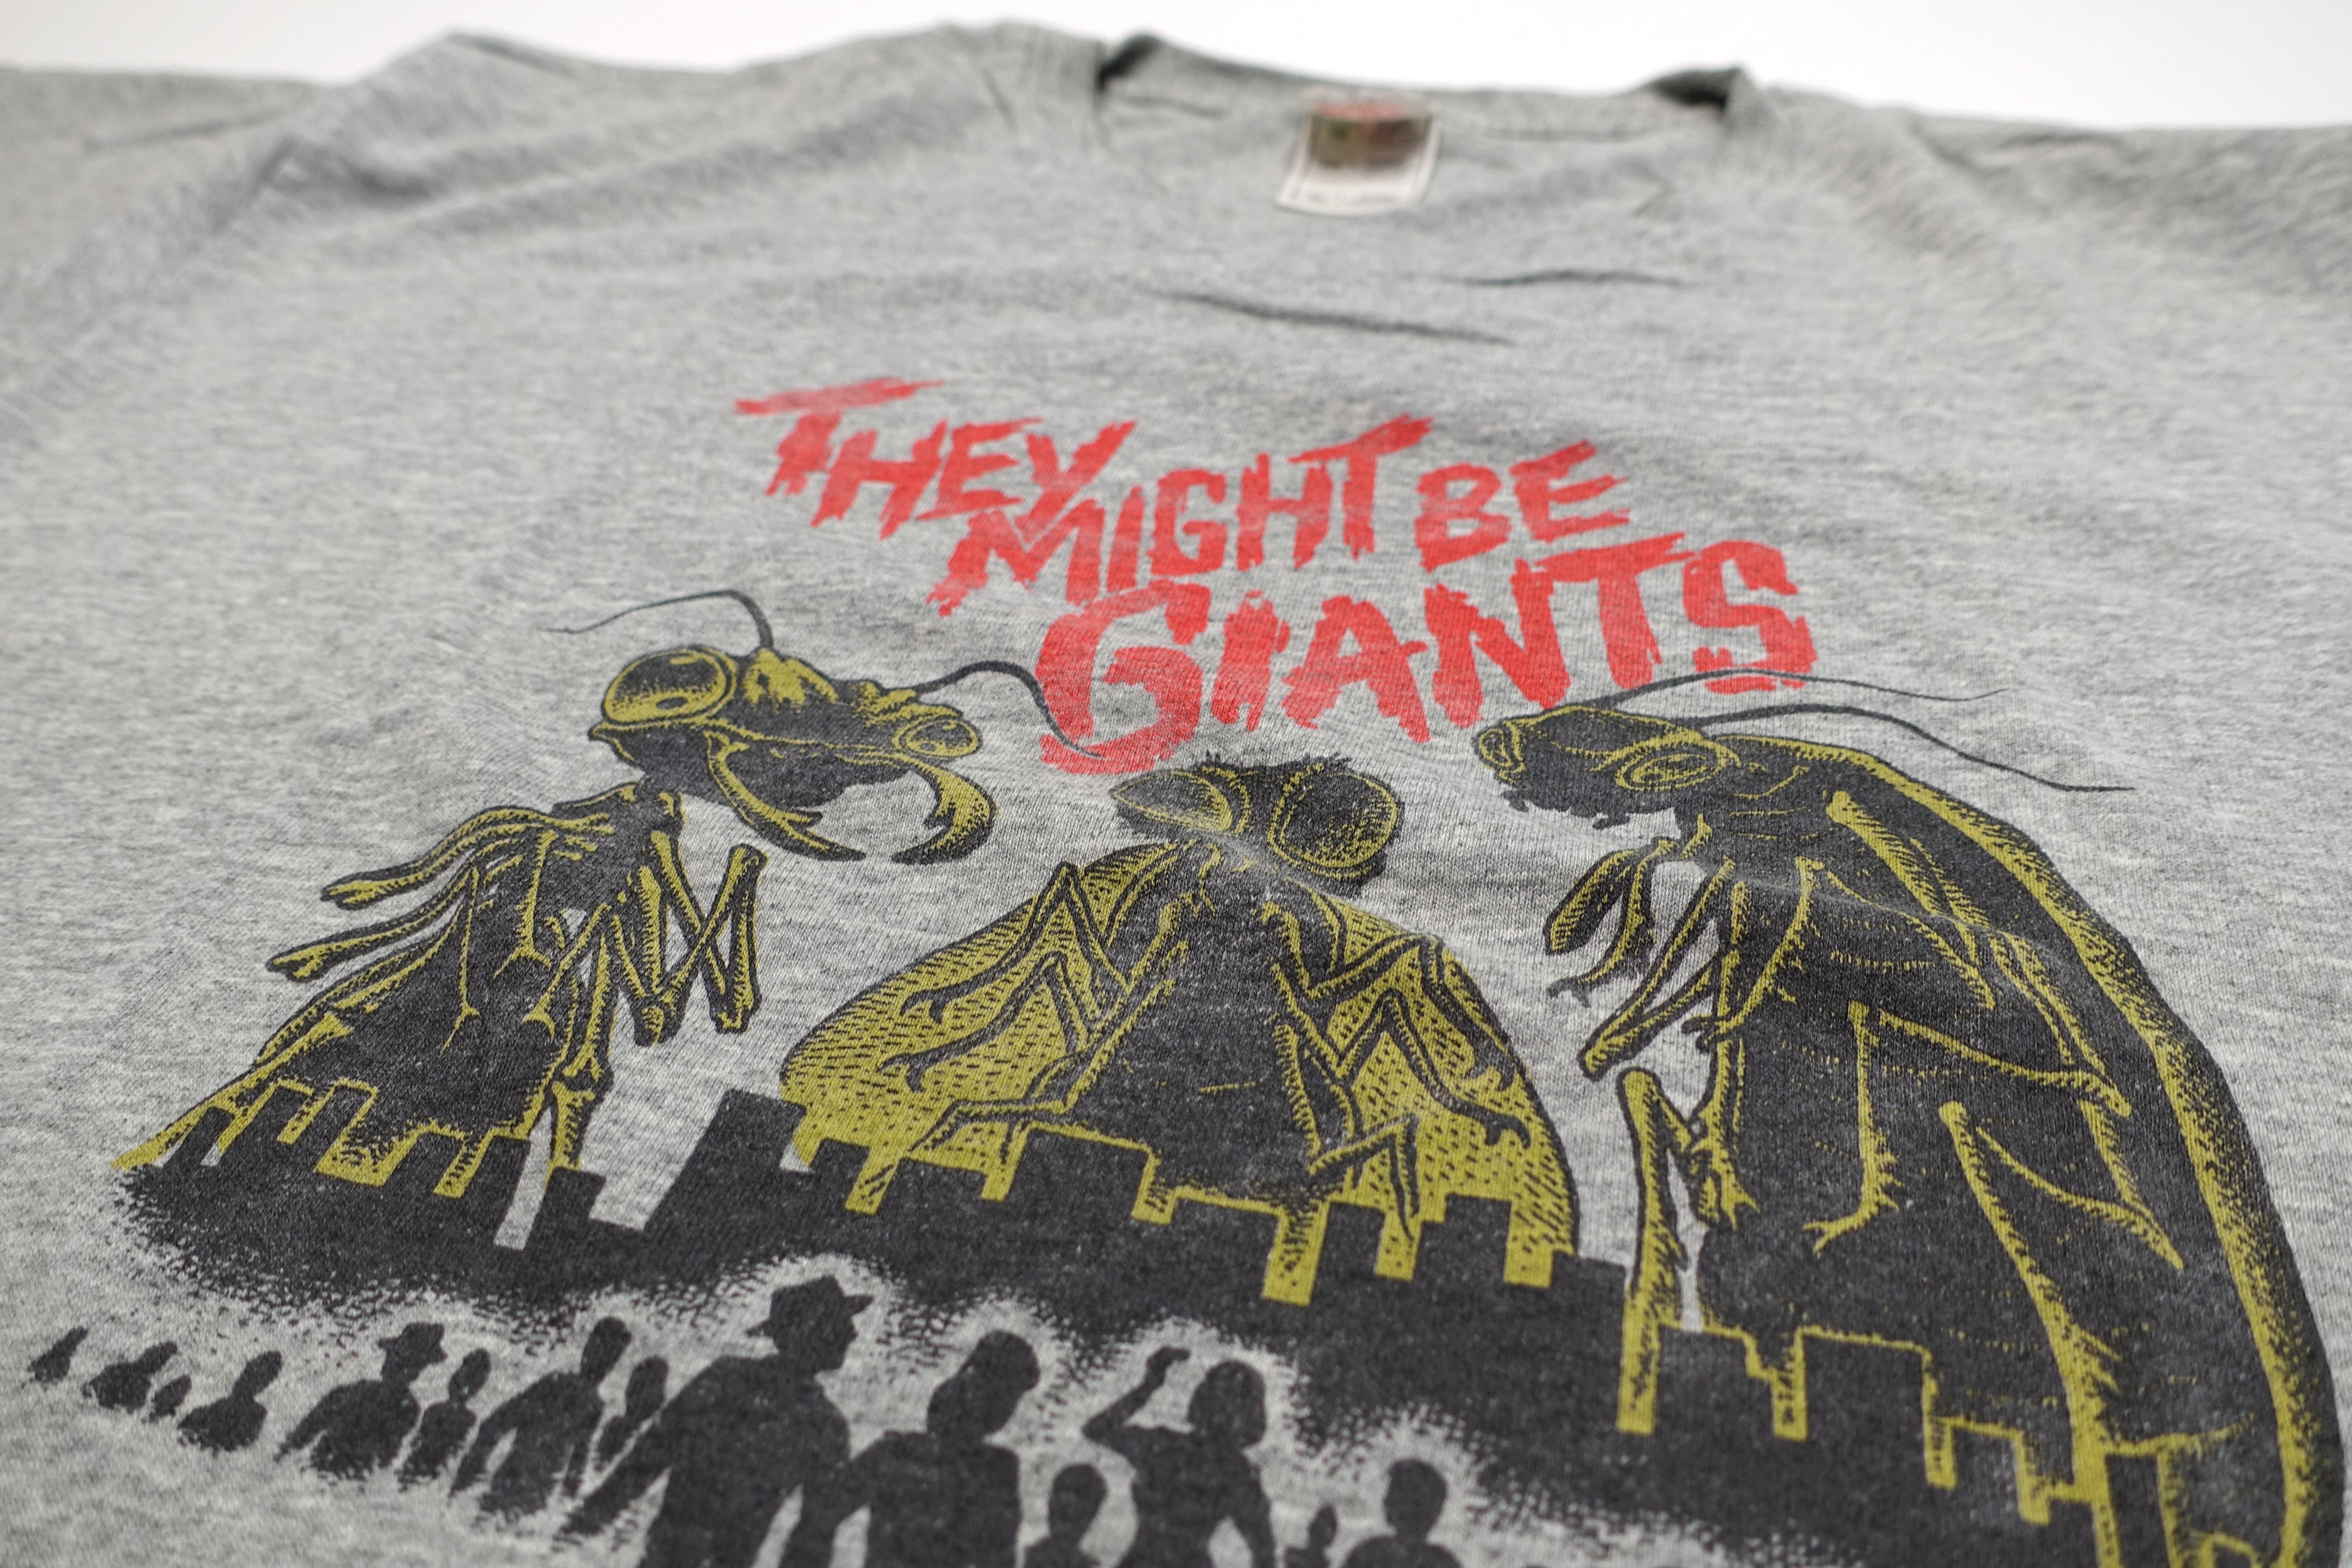 They Might Be Giants - Ants Invade Dial A Song Shirt Size XL